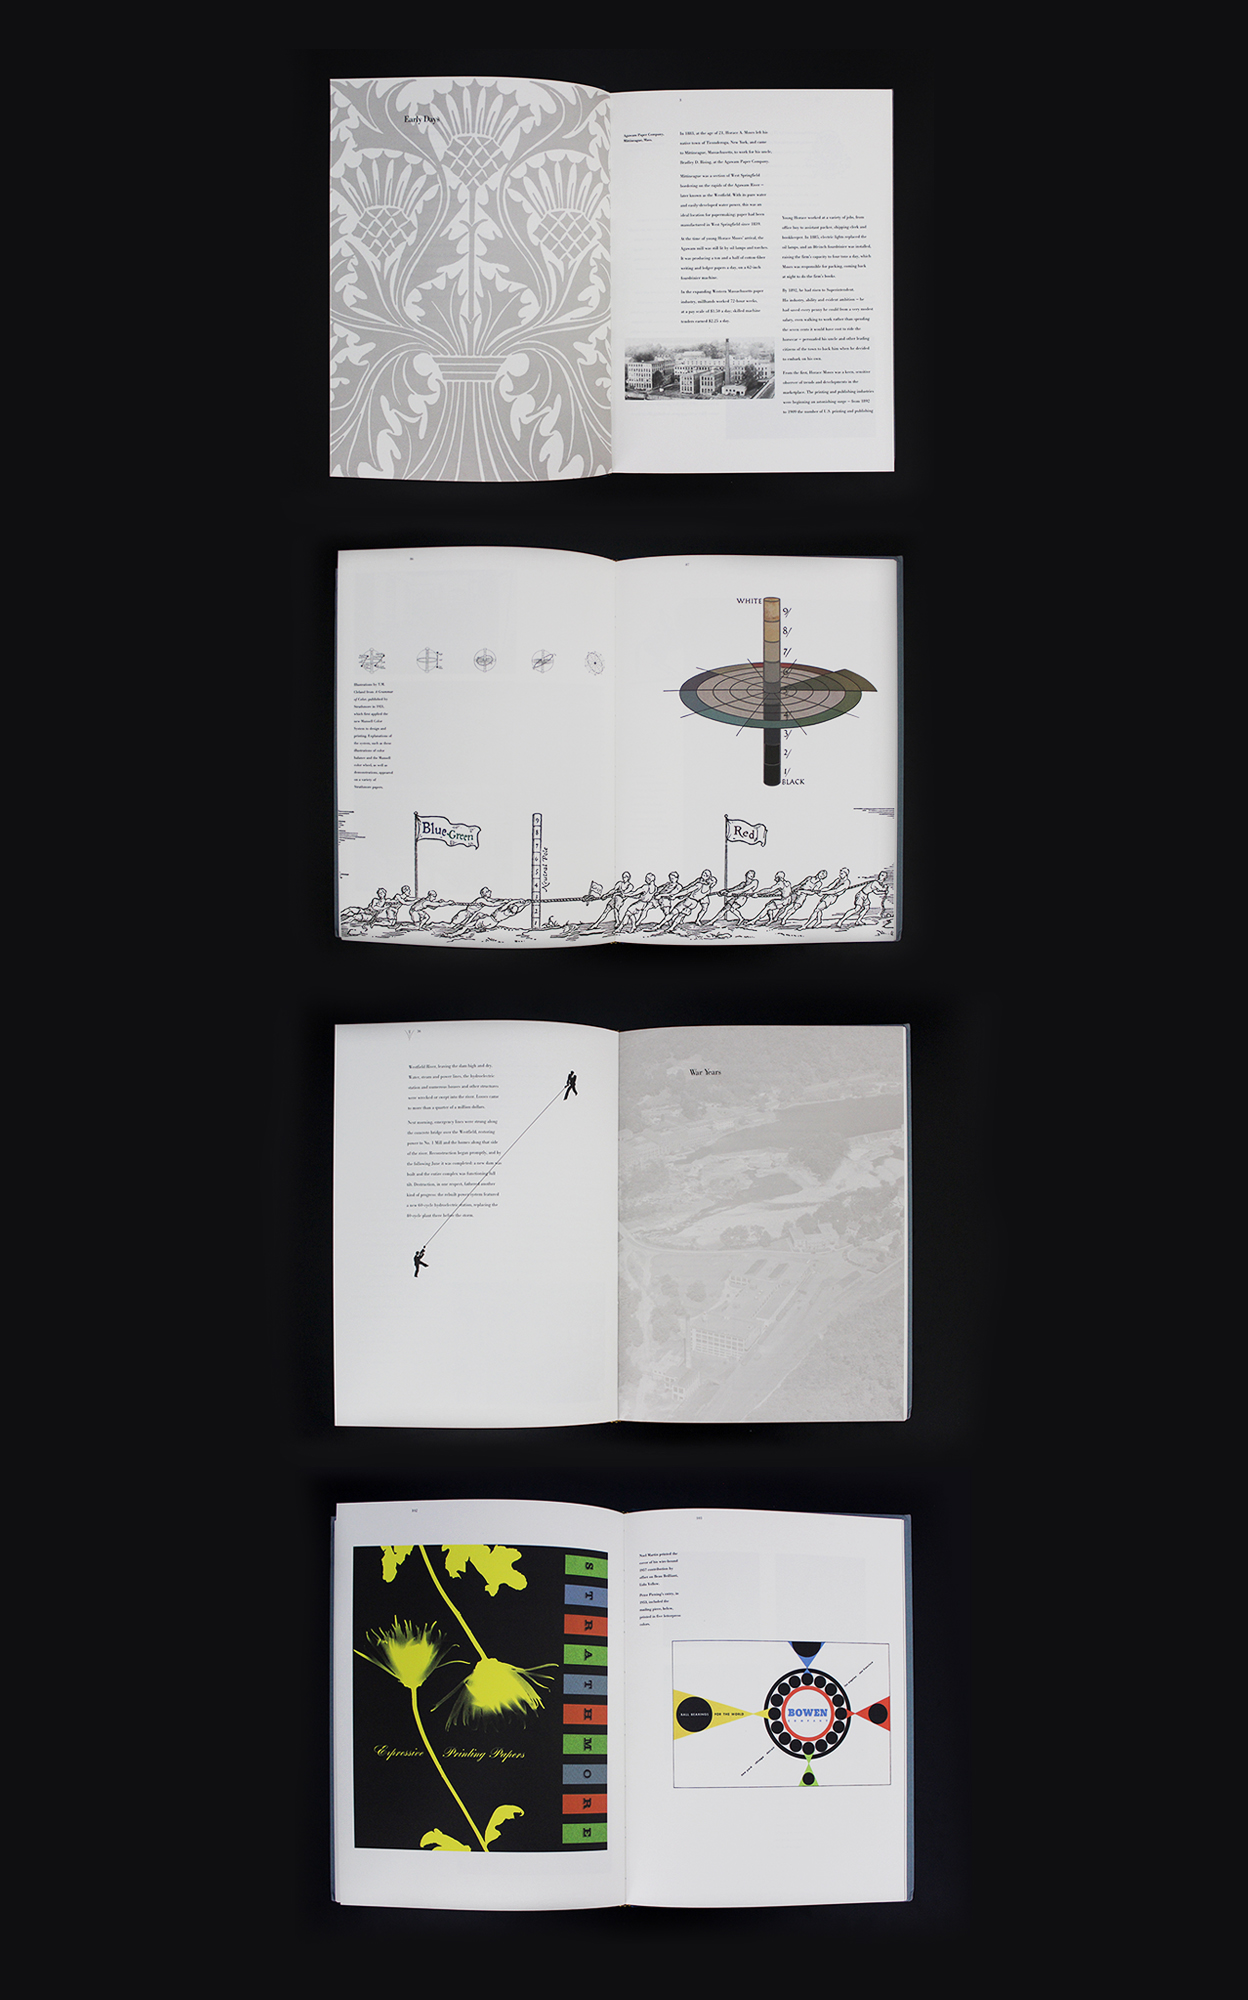 The 100th Anniversary series of page spreads